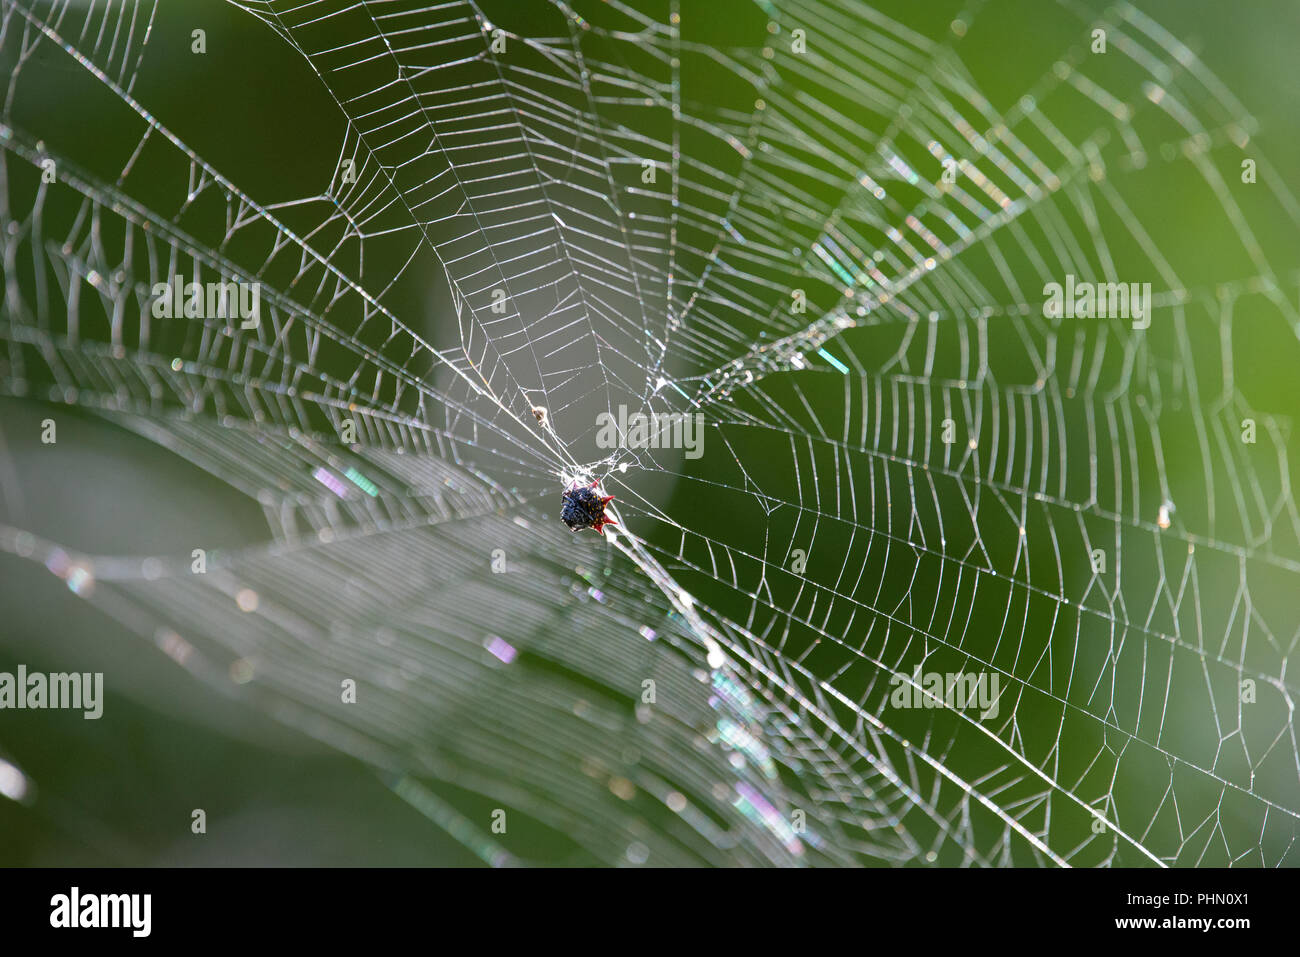 A spinybacked orbweaver spider web. Stock Photo